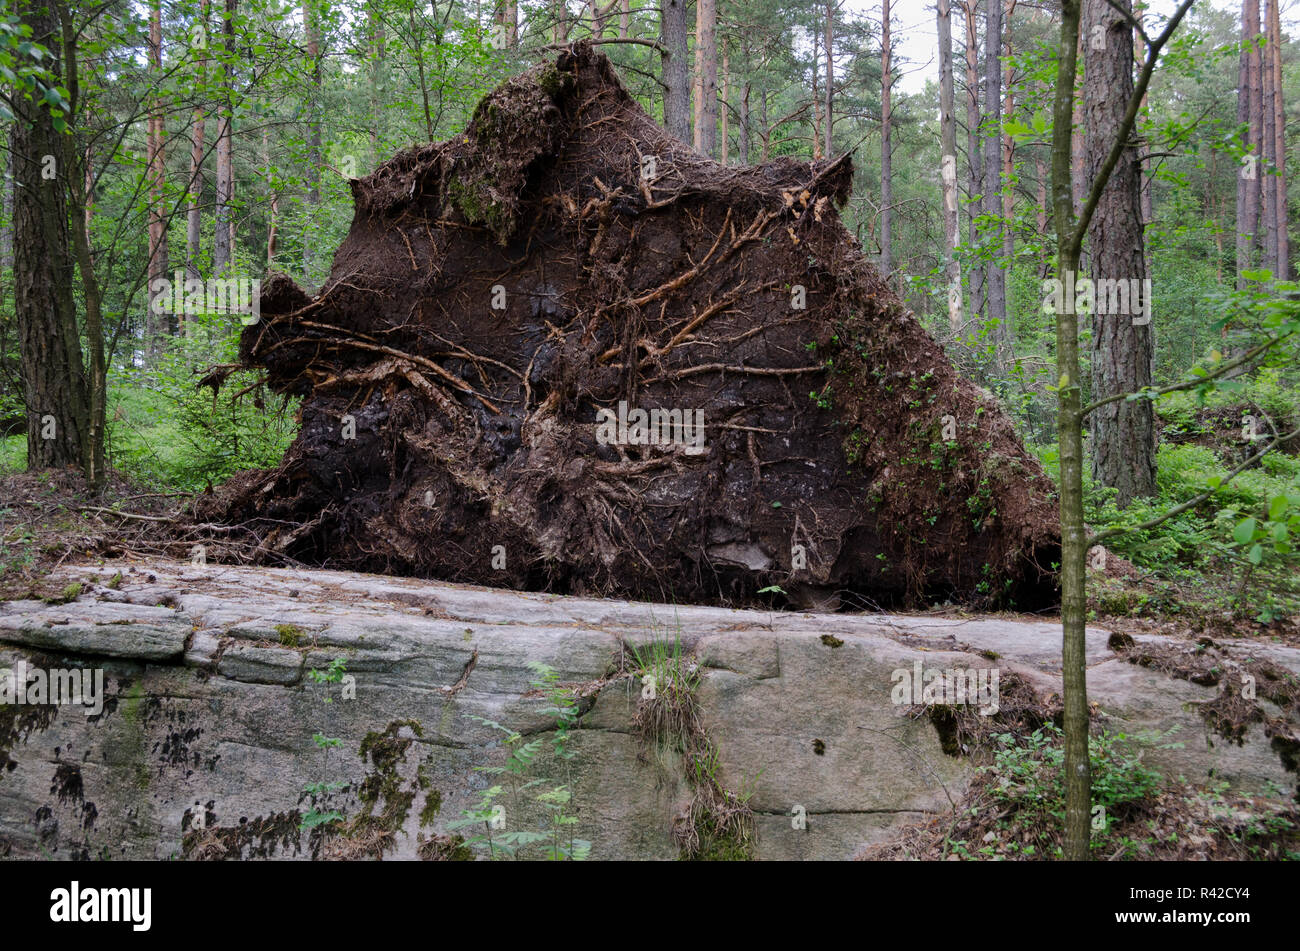 uprooted tree Stock Photo